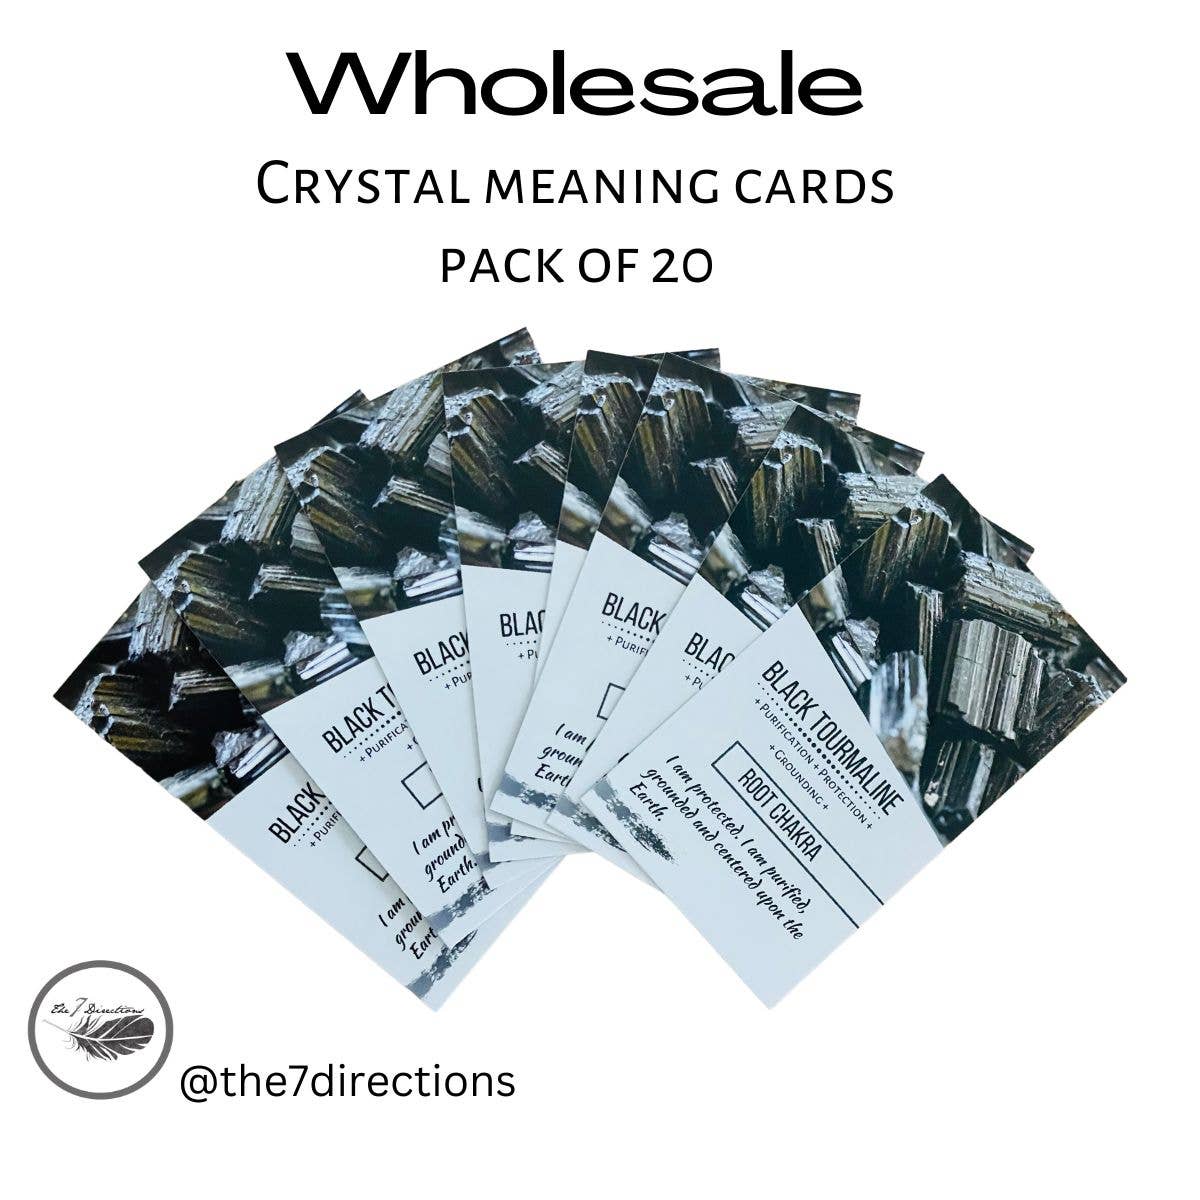 A-B Wholesale Pack of 20 crystal meaning cards (ONE DESIGN): Angel Aura